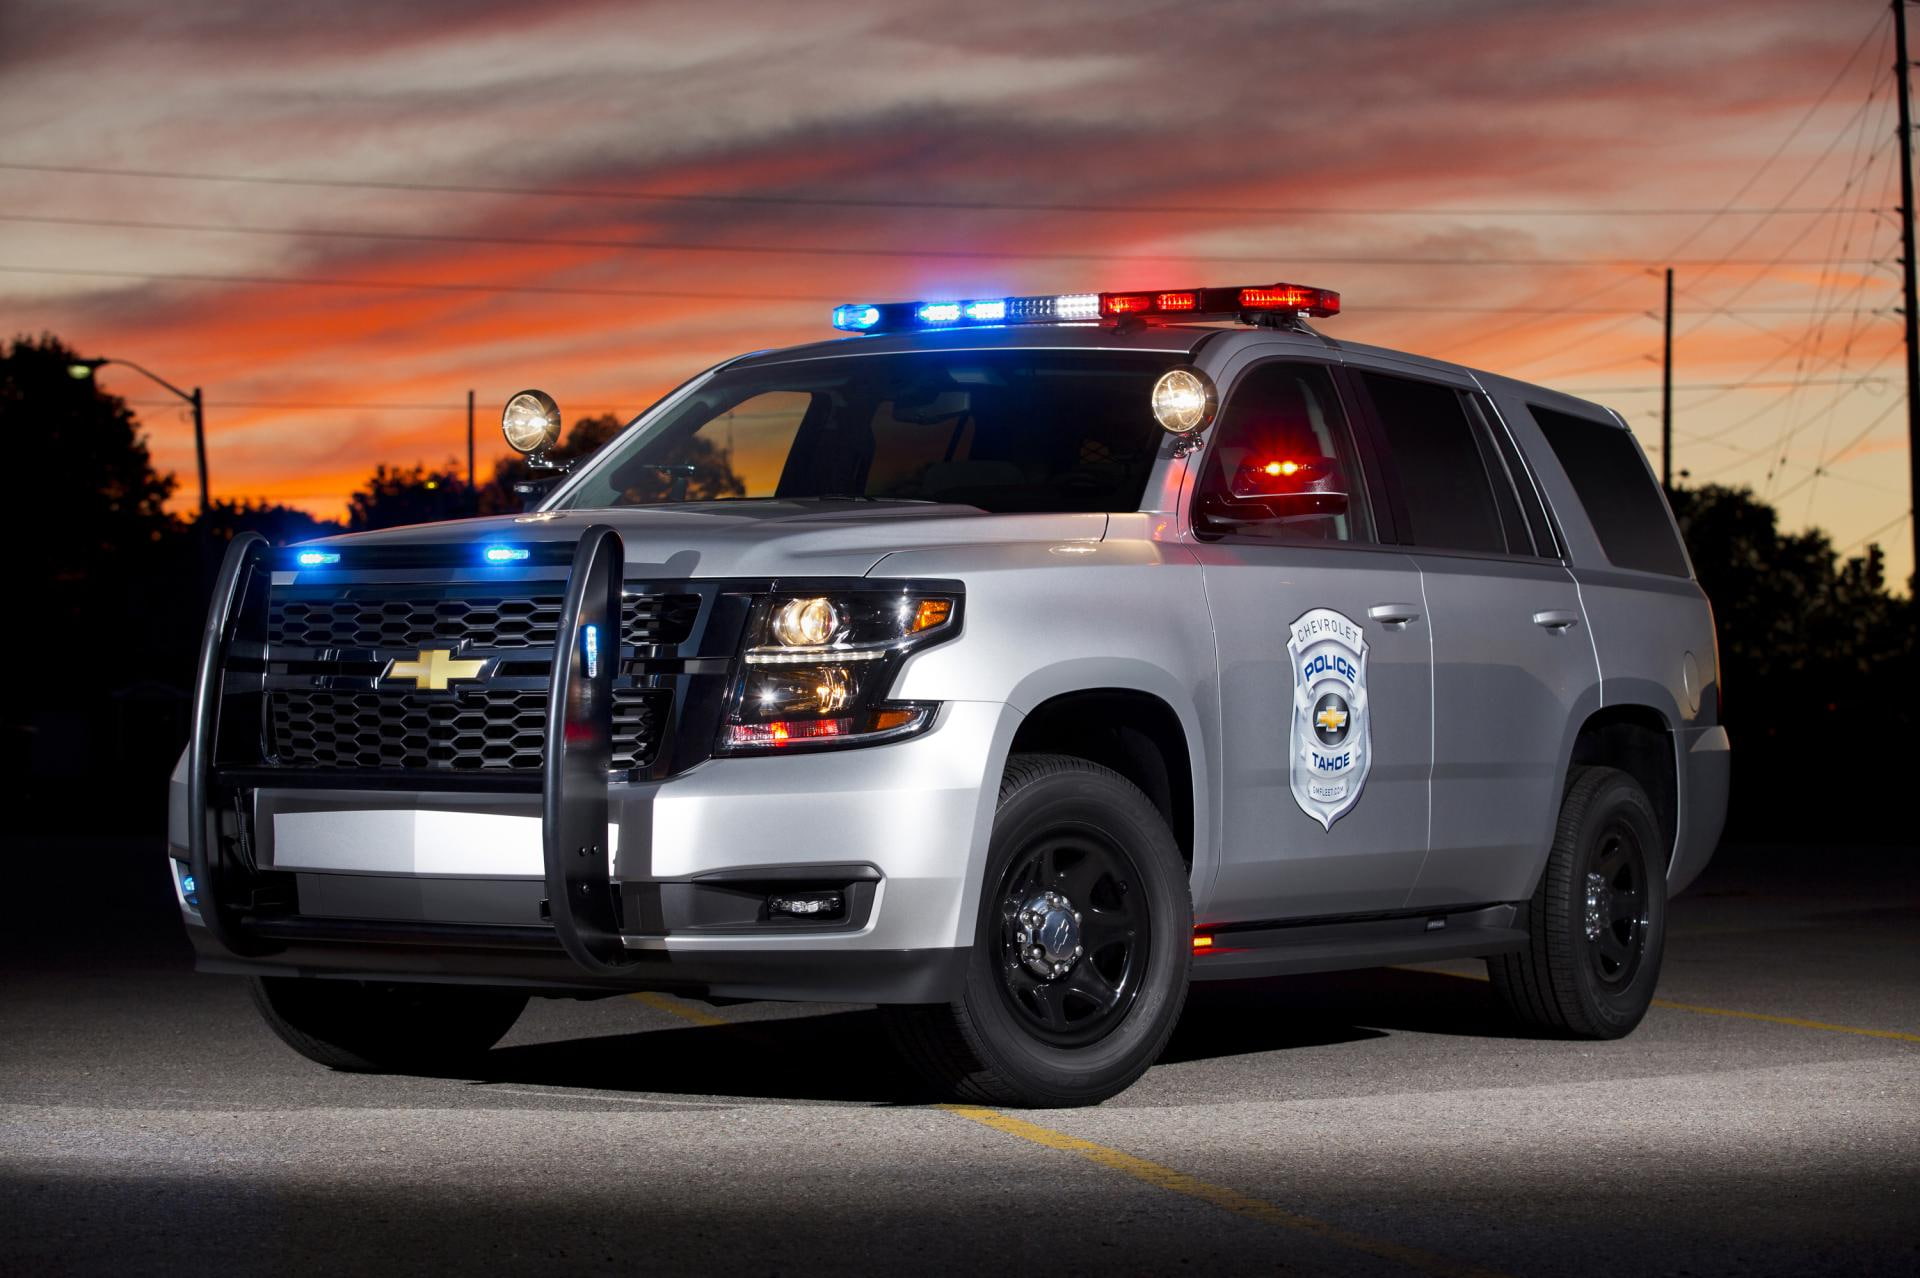 Chevrolet Tahoe PPV, chevy tahoe police concept, car